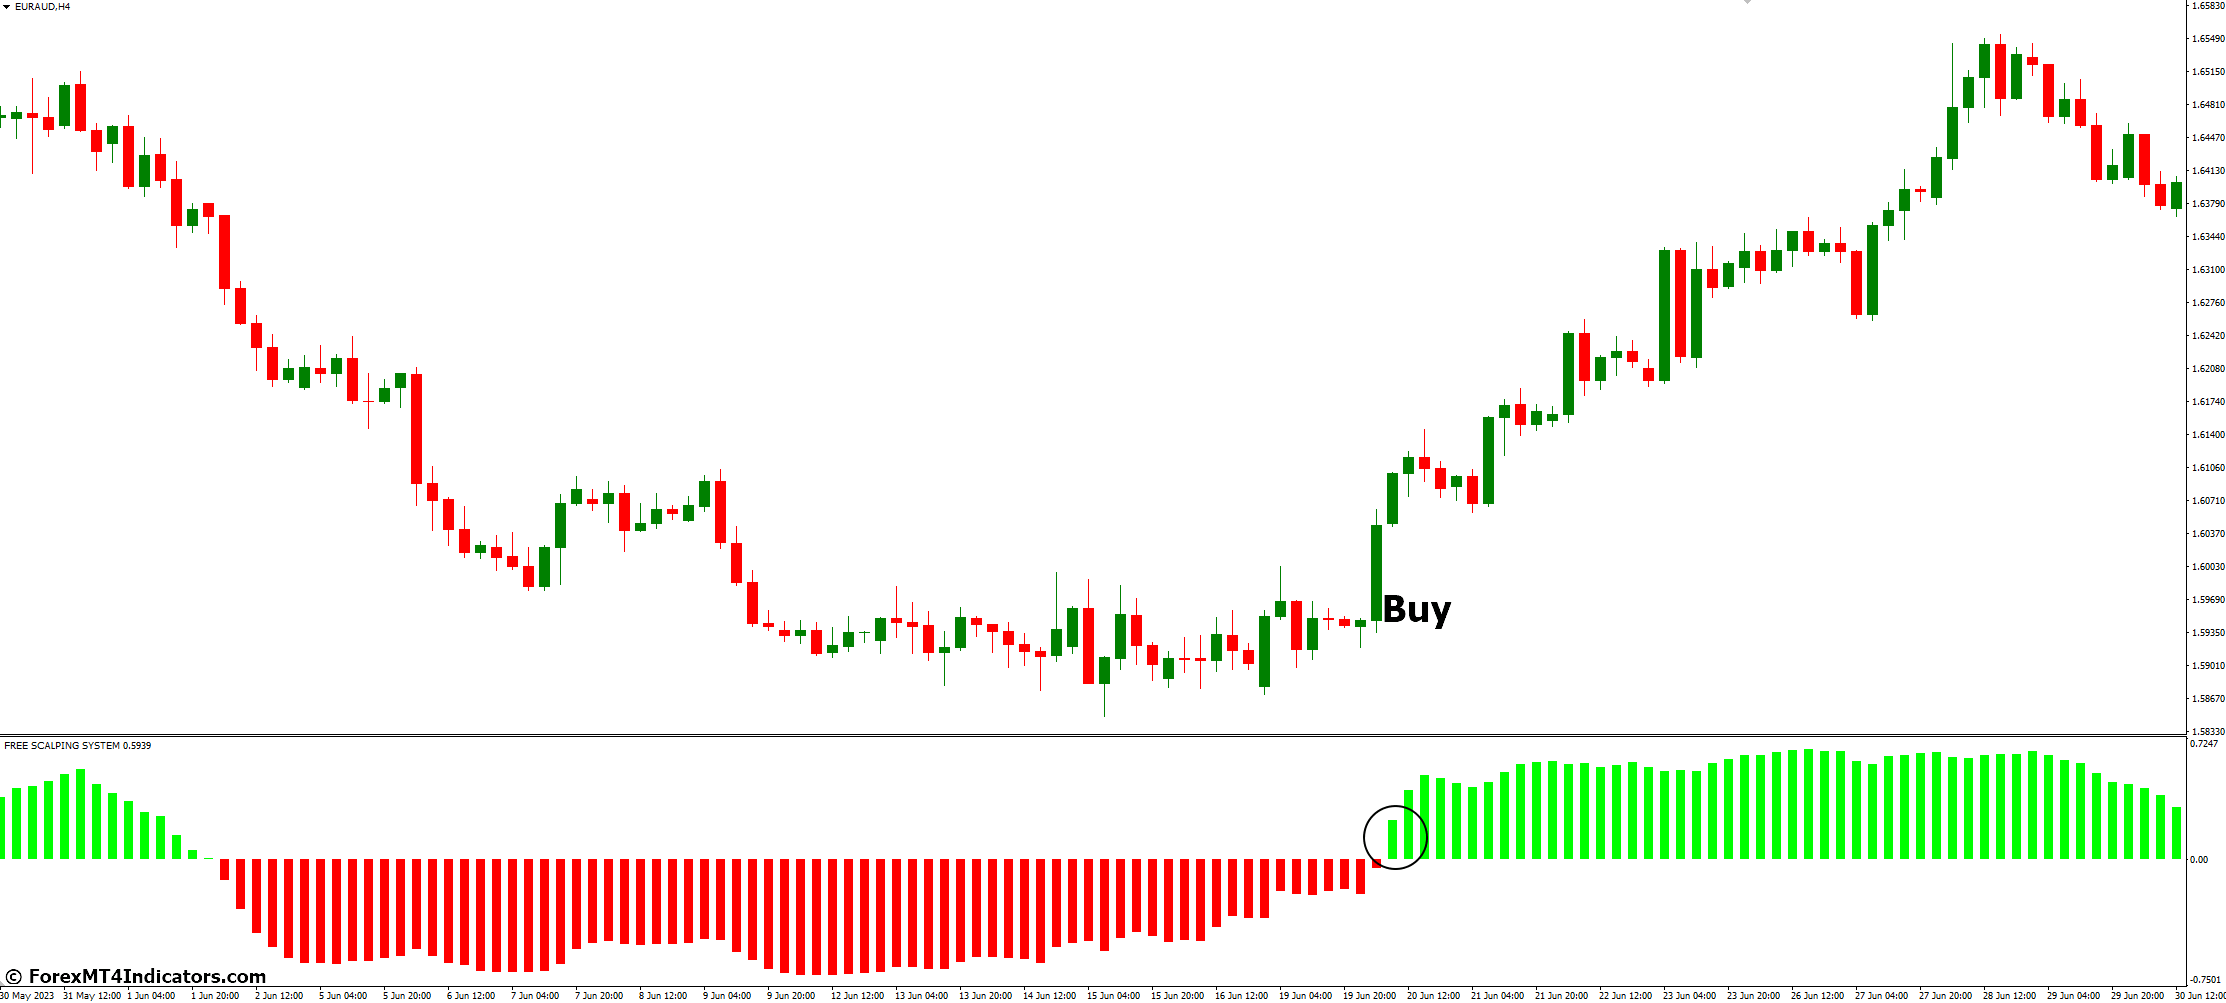 How to Trade with Free Scalping MT4 Indicator - Buy Entry